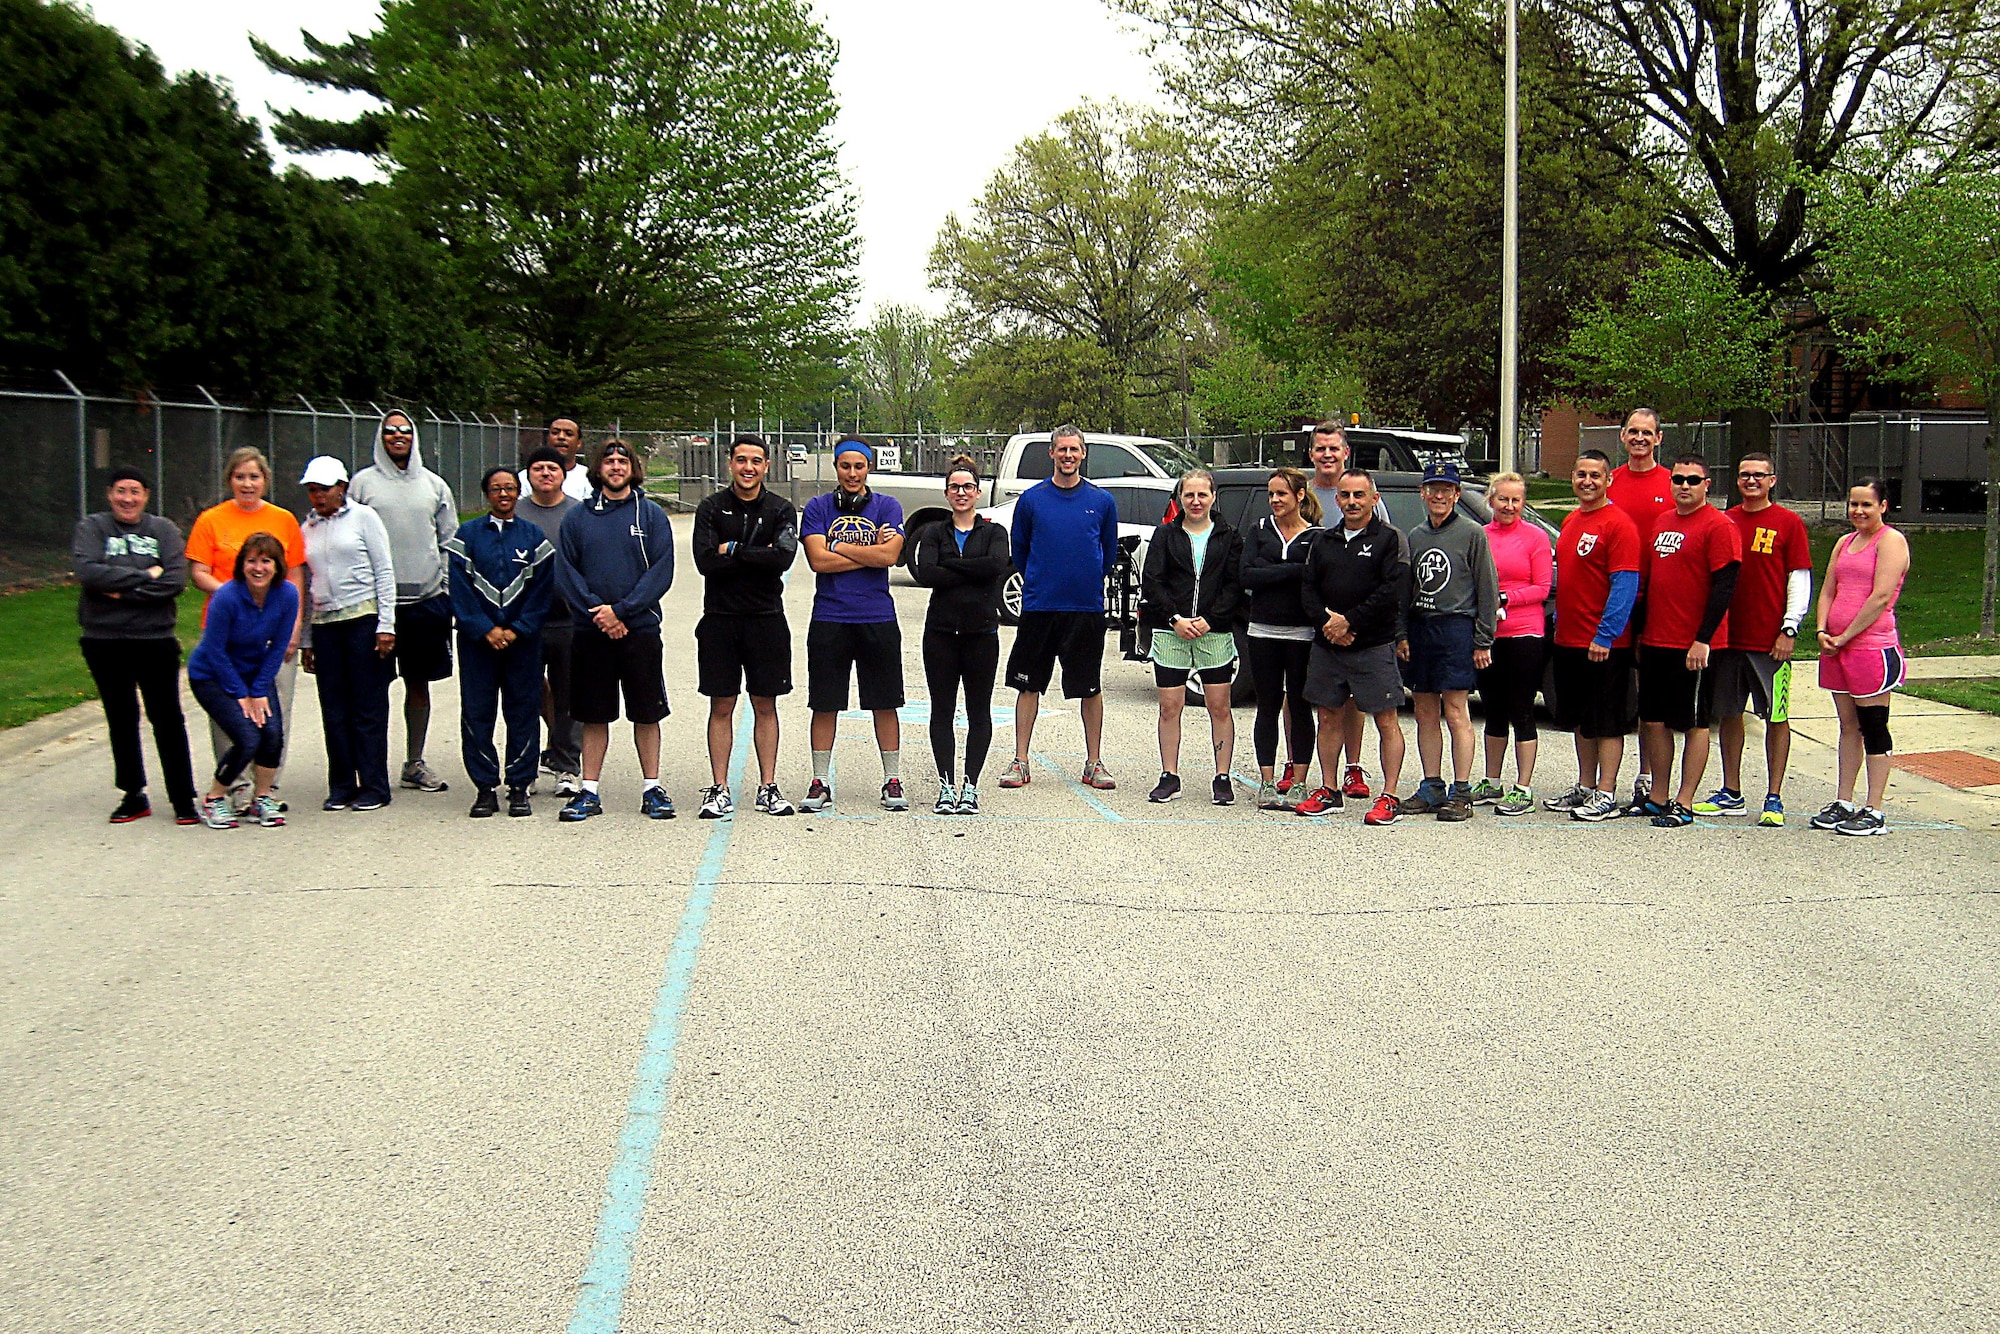 Participants gather at the 2016 Plastic Egg Run starting line April 27, 2016 at Grissom Air Reserve Base, Ind. At various intervals during the 5K run teams had to stop and select a plastic egg which contained a challenge to complete before moving on to the next station. (U.S. Air Force photo/Senior Airman Dakota Bergl)